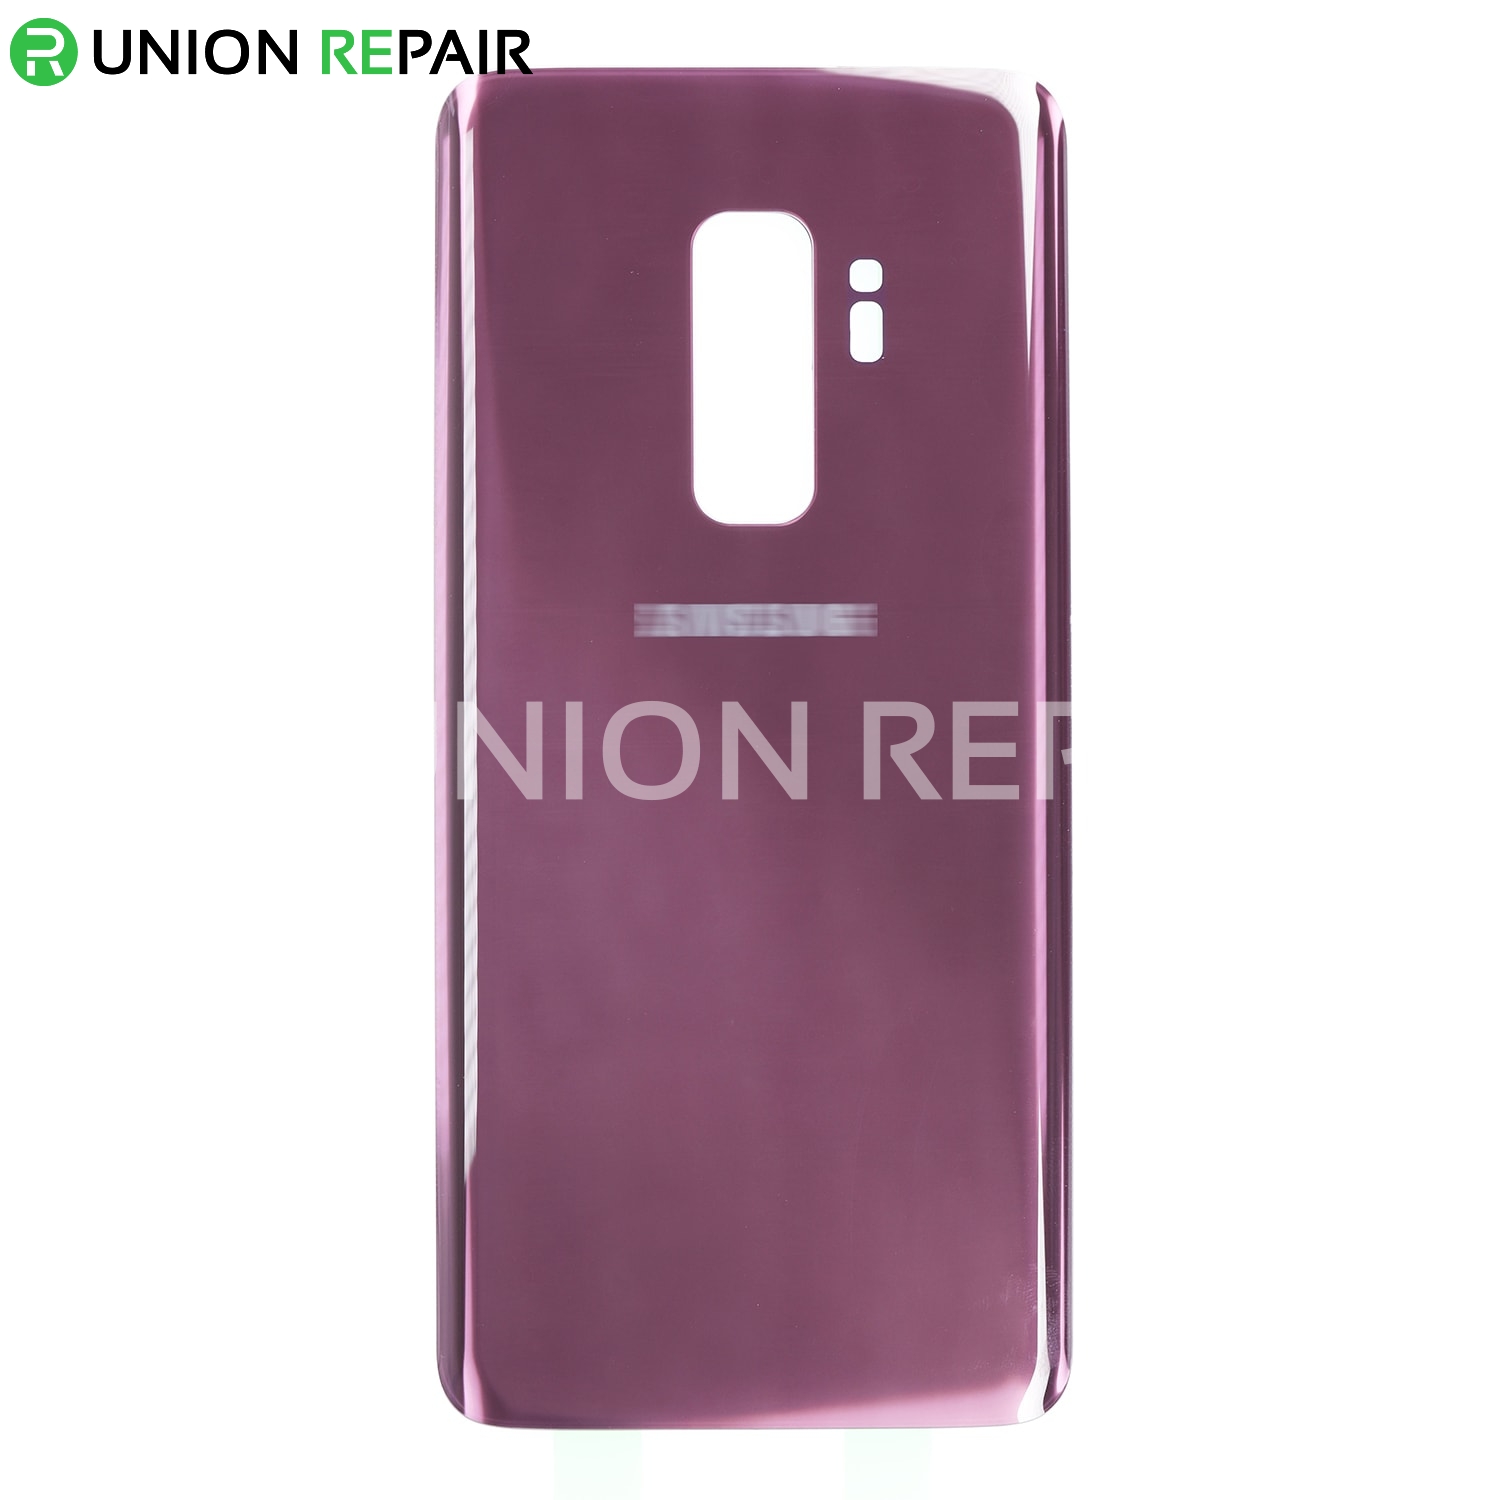 Replacement for Samsung Galaxy S9 Plus SM-G965 Back - Lilac Purple